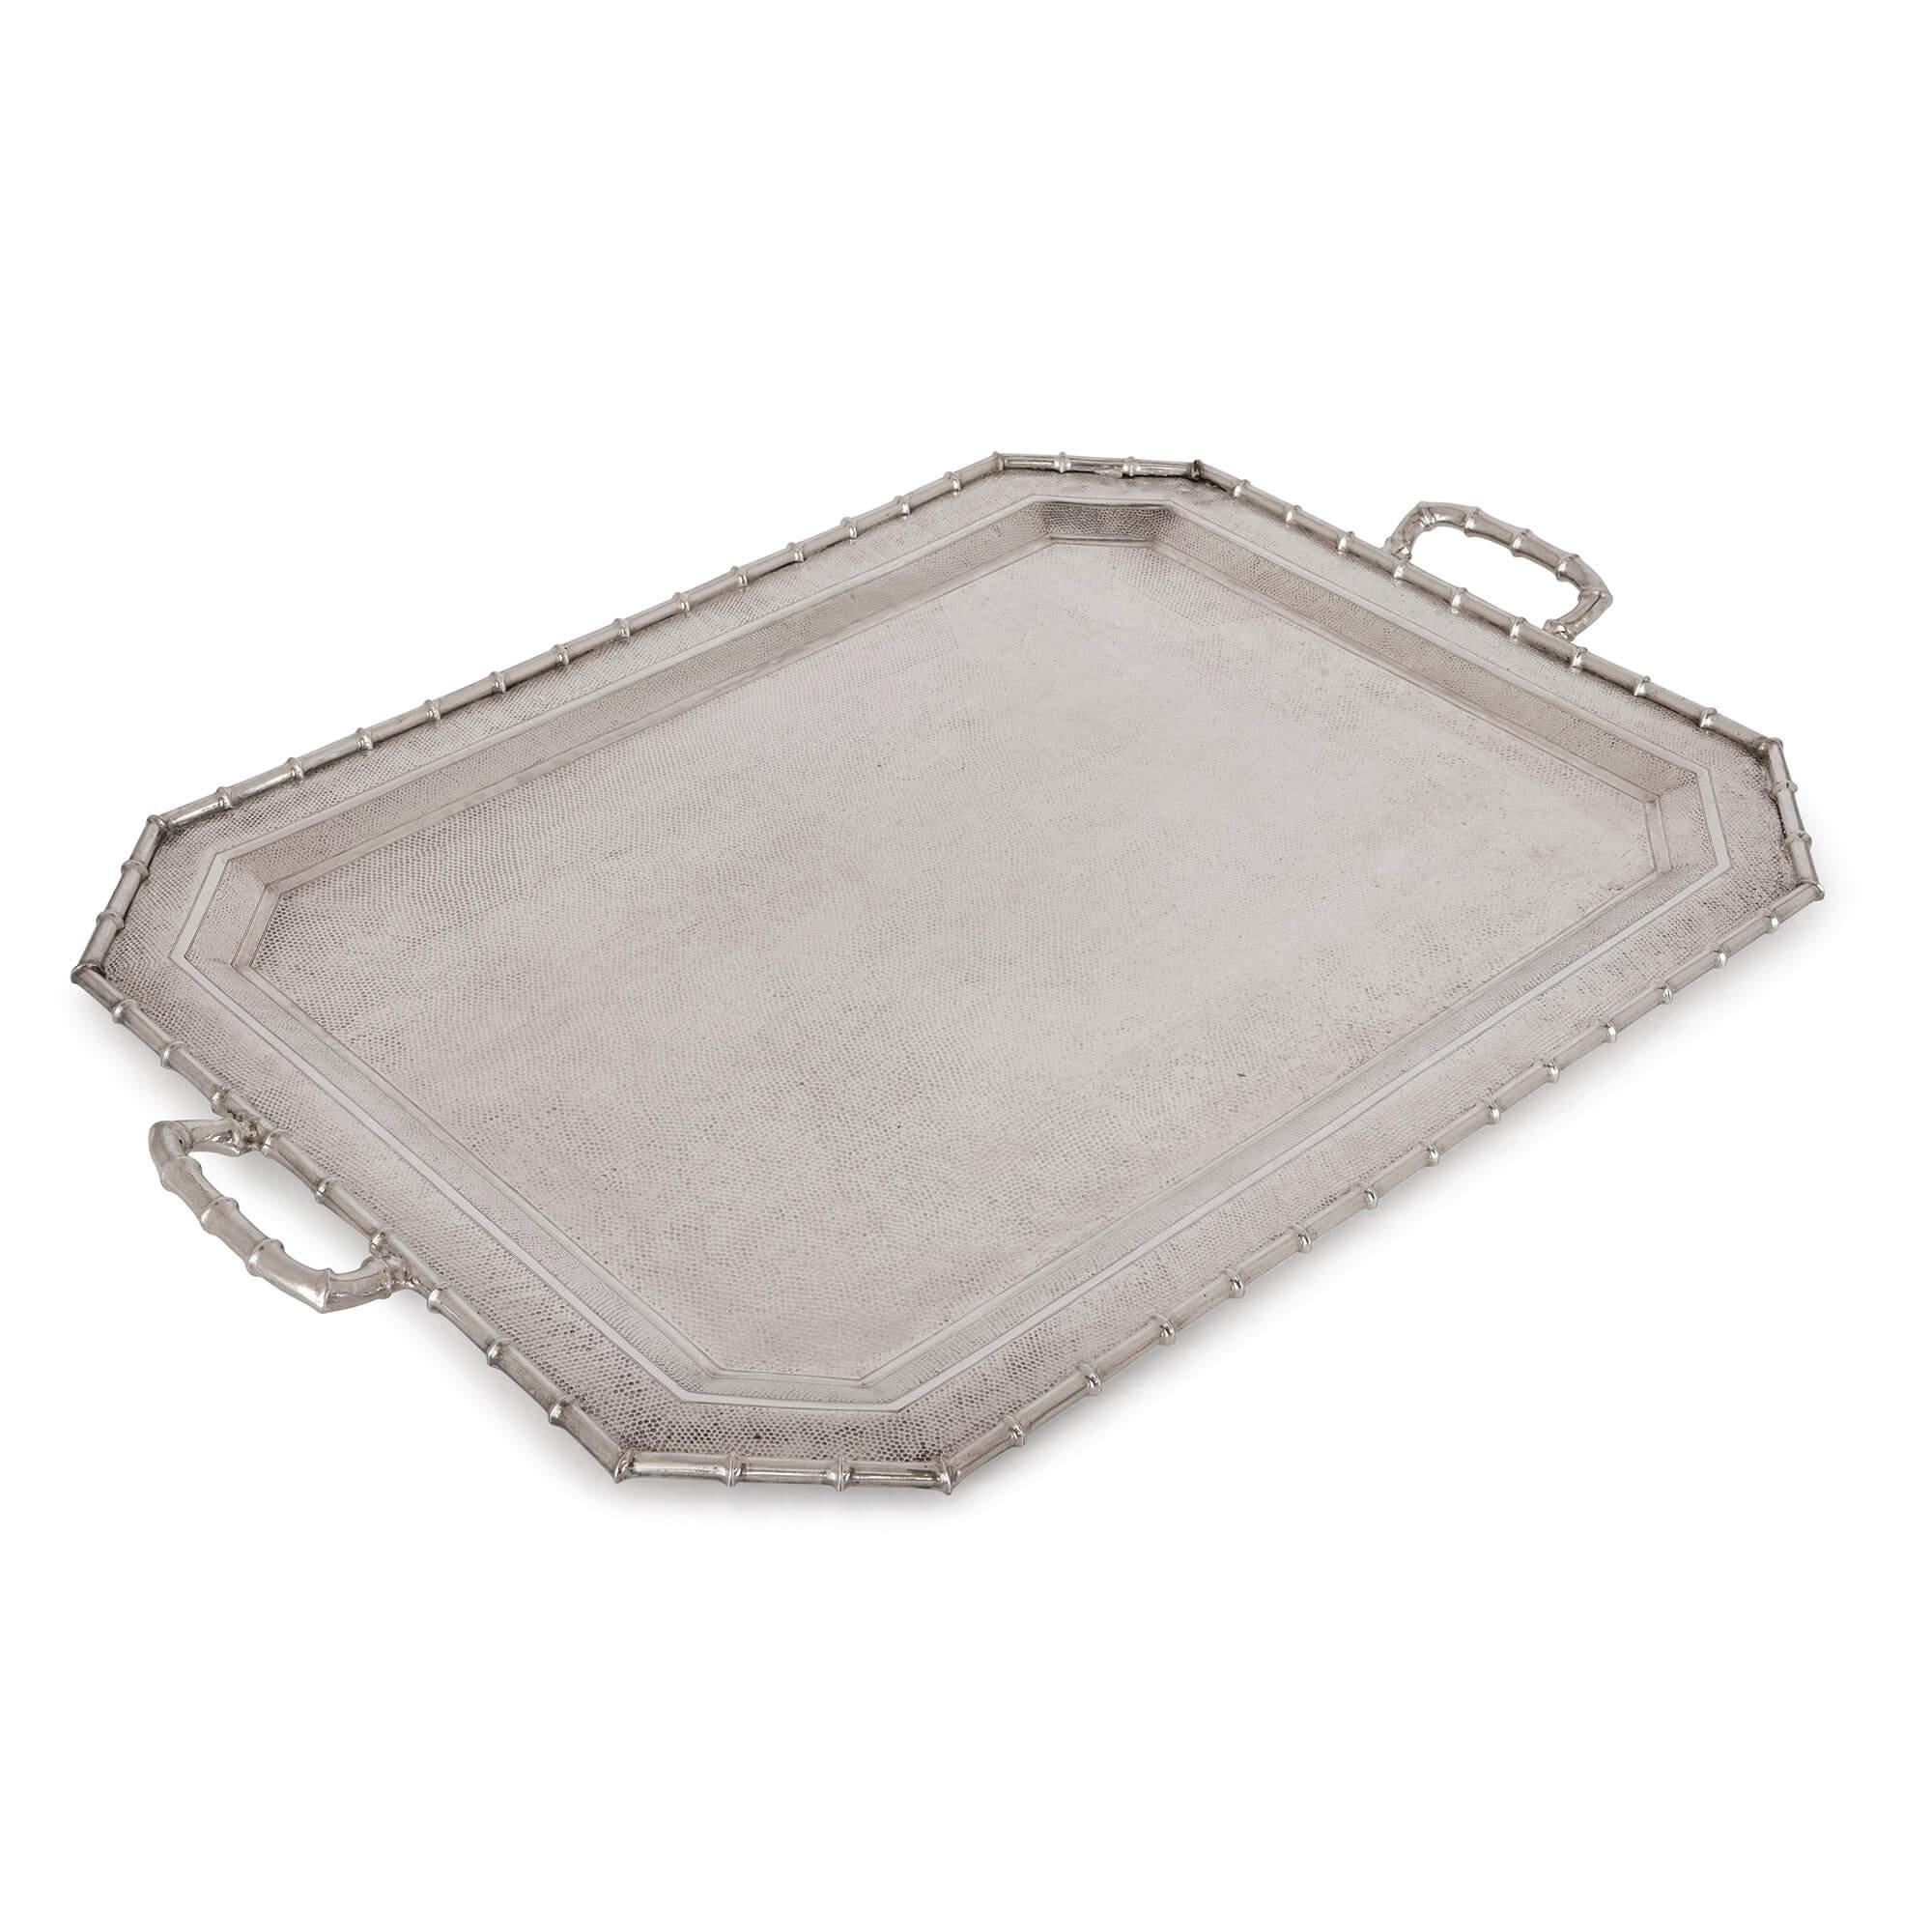 This silver tray is a beautiful piece of tableware, which skilfully blends Eastern and Western decorative styles. It has been decorated with a twisted bamboo edge, bamboo handles and the tray base has been carefully hammered to give the piece a